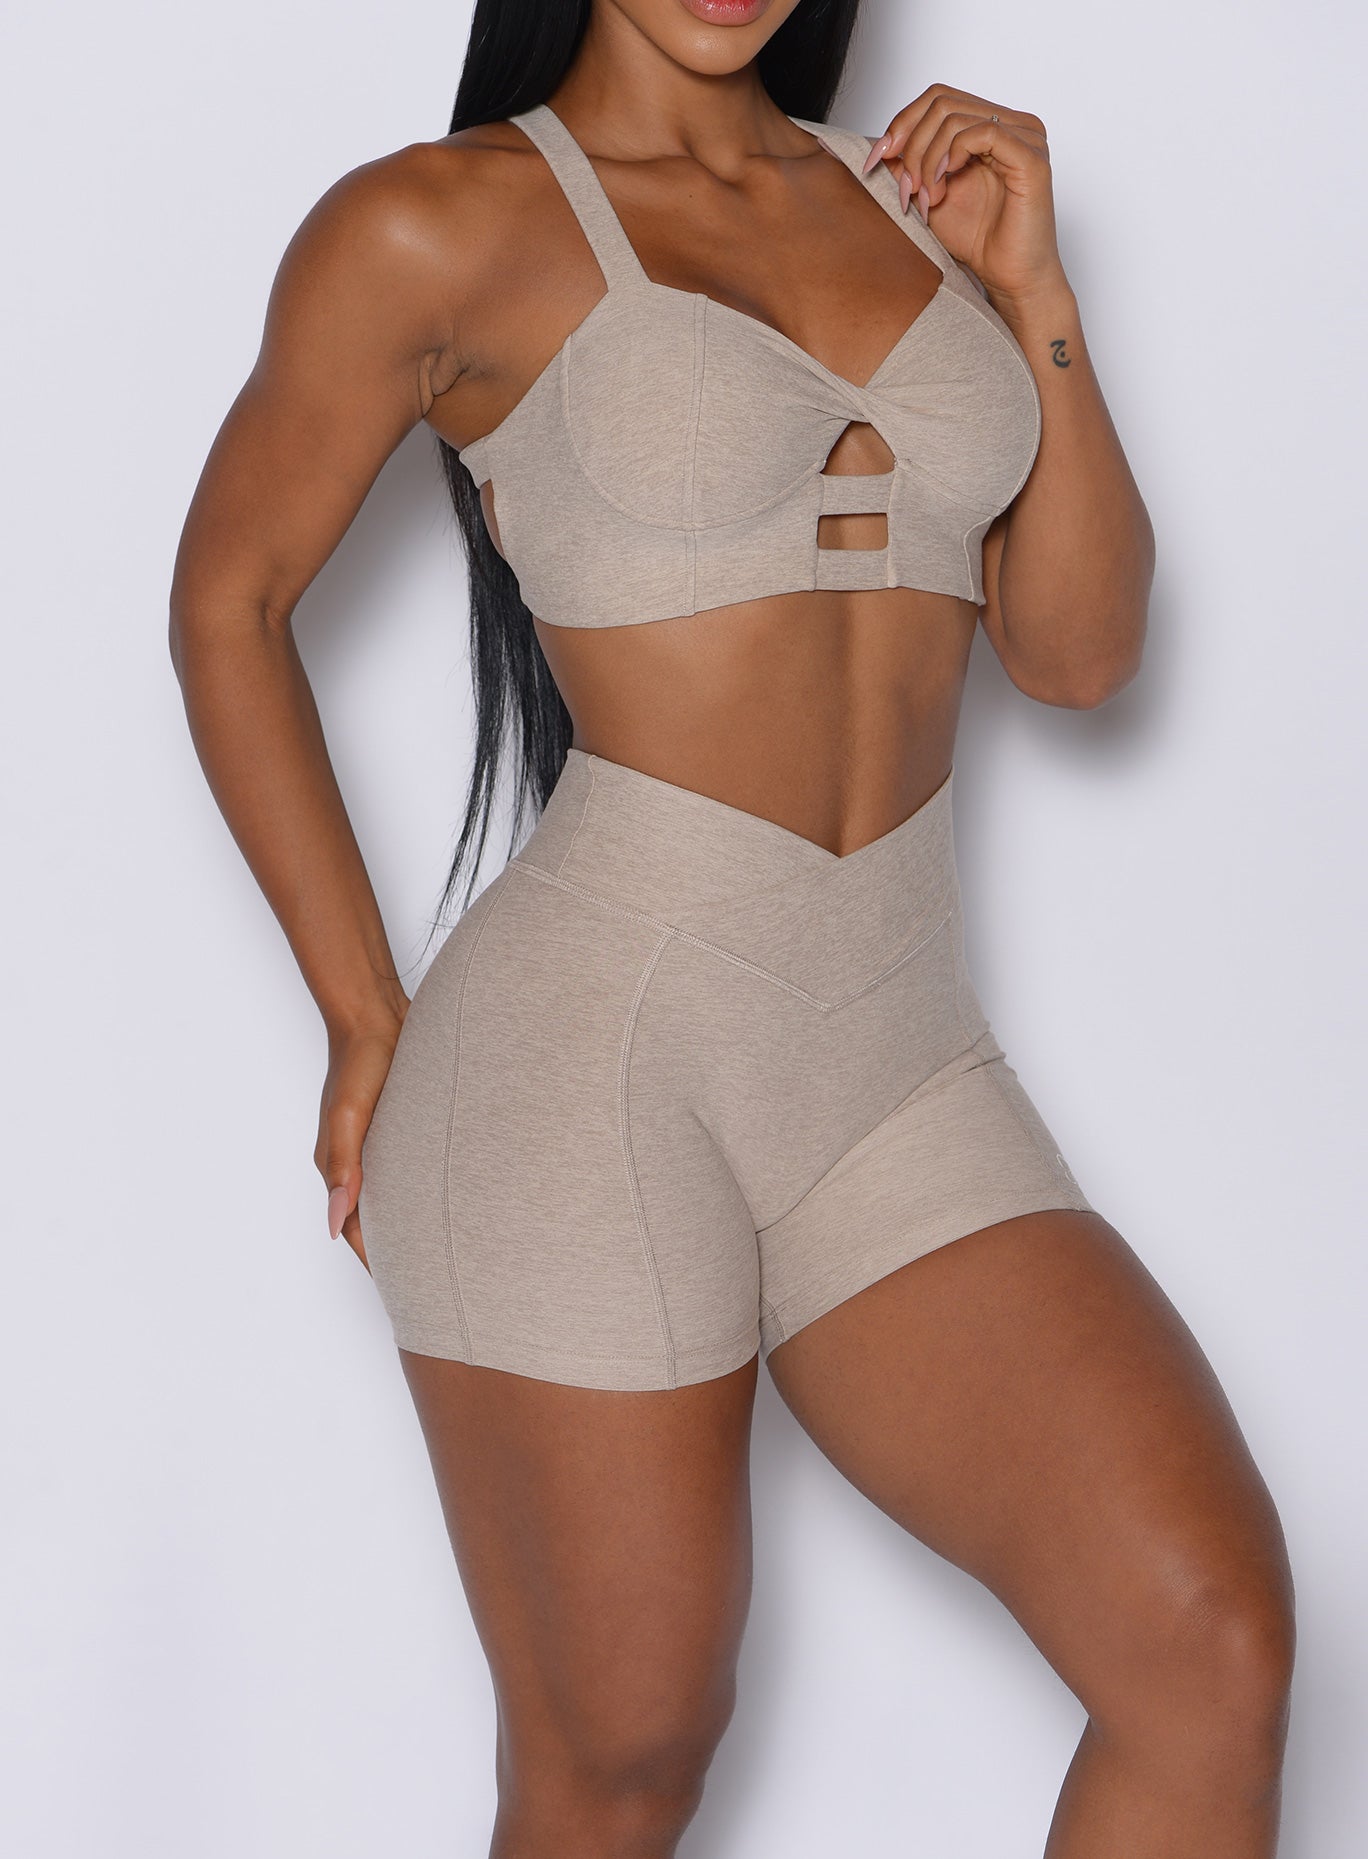 zoomed in right side picture of a model facing slightly to her front wearing our Tiny Waist Shorts in Taupe color and a matching sports bra